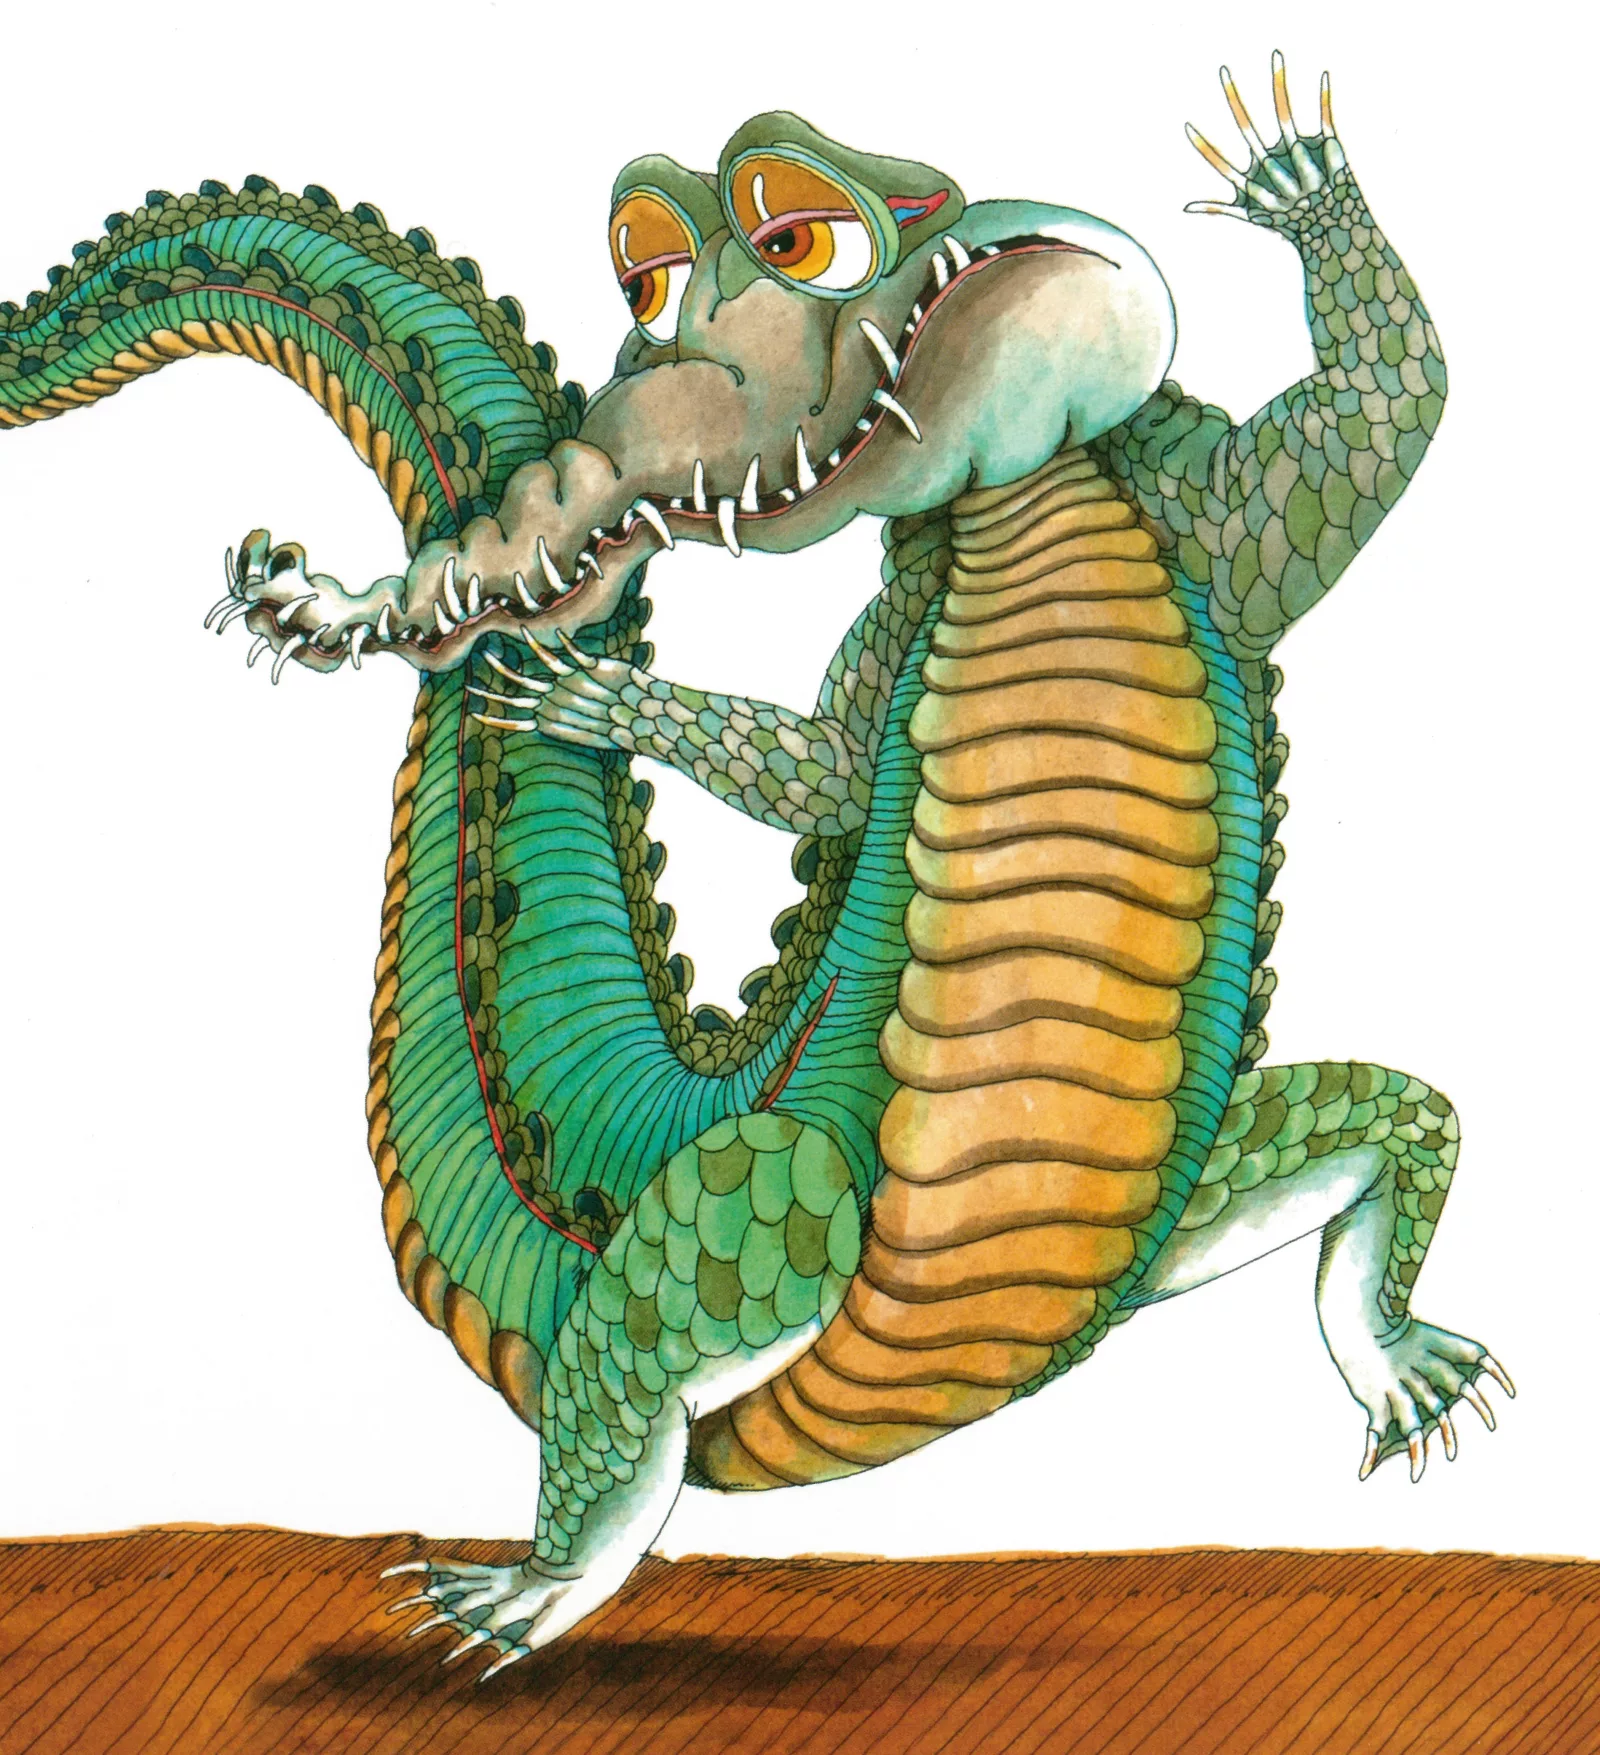 From Angry Aardvark to Zealous Zebra: Curious Creatures ABC, by Scott Thomas; illustrated by Robert Byrd